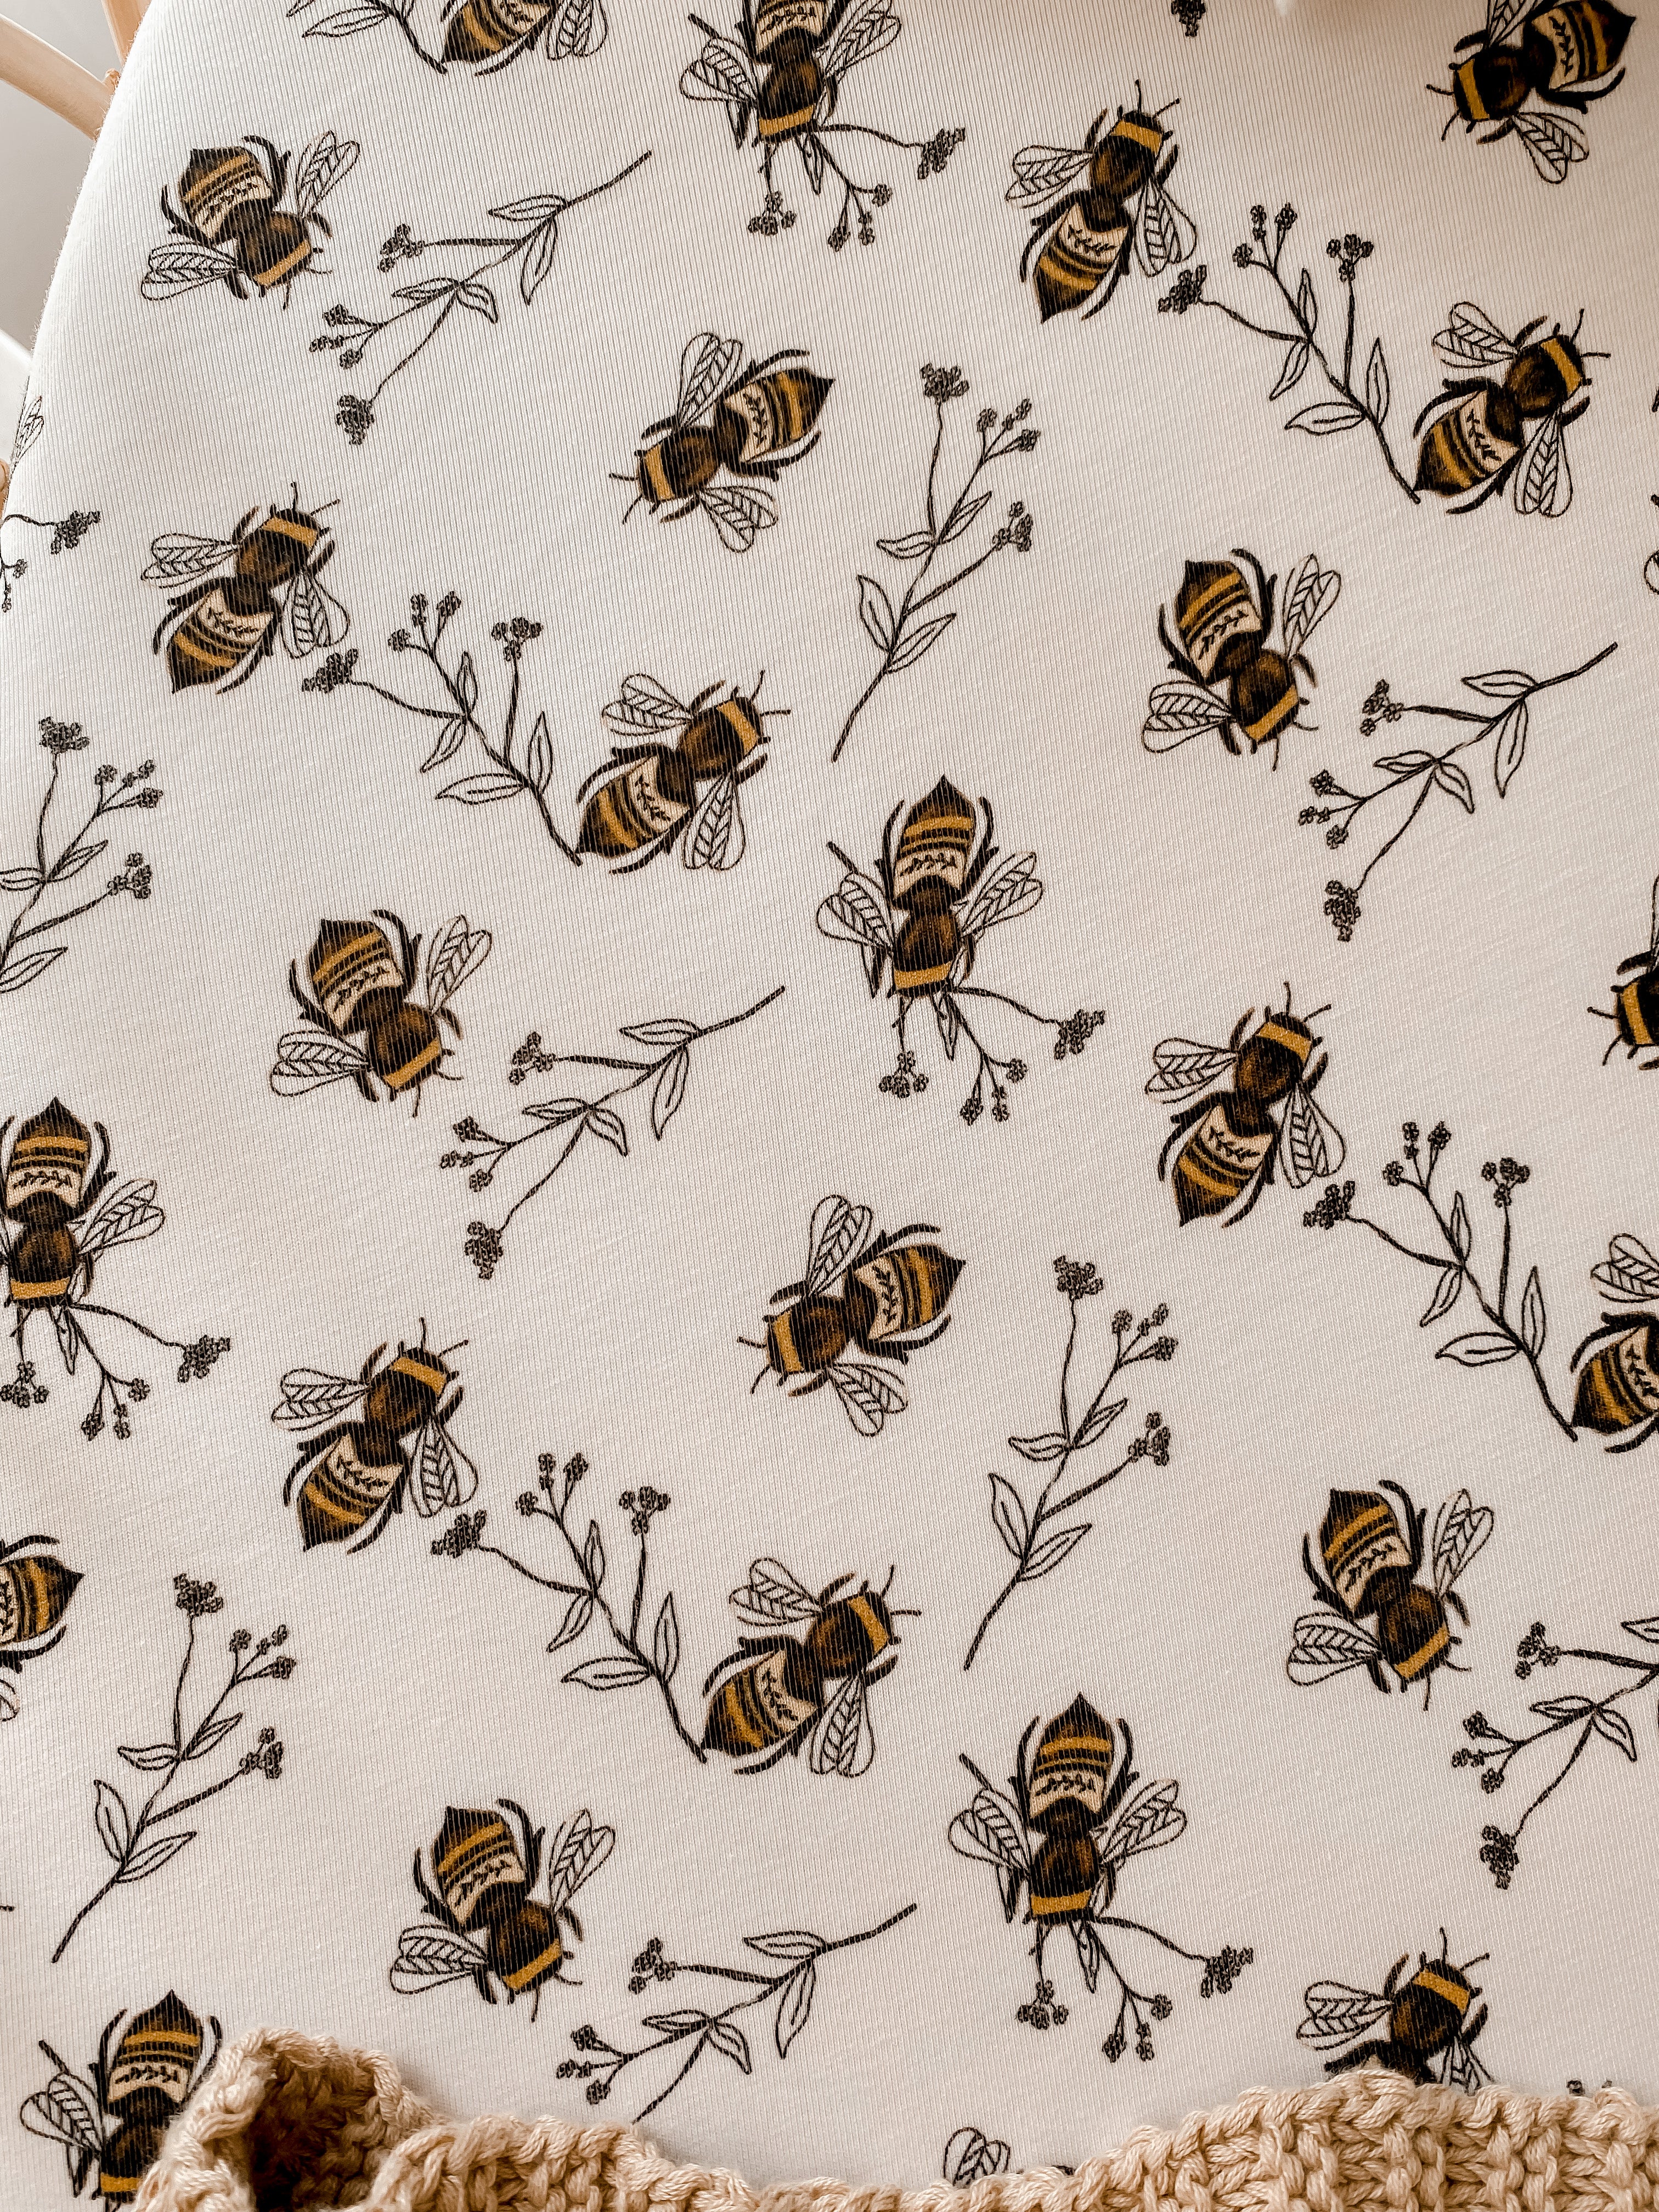 Snuggly Jack's exclusive bee print in a bassinet sheet/change pad